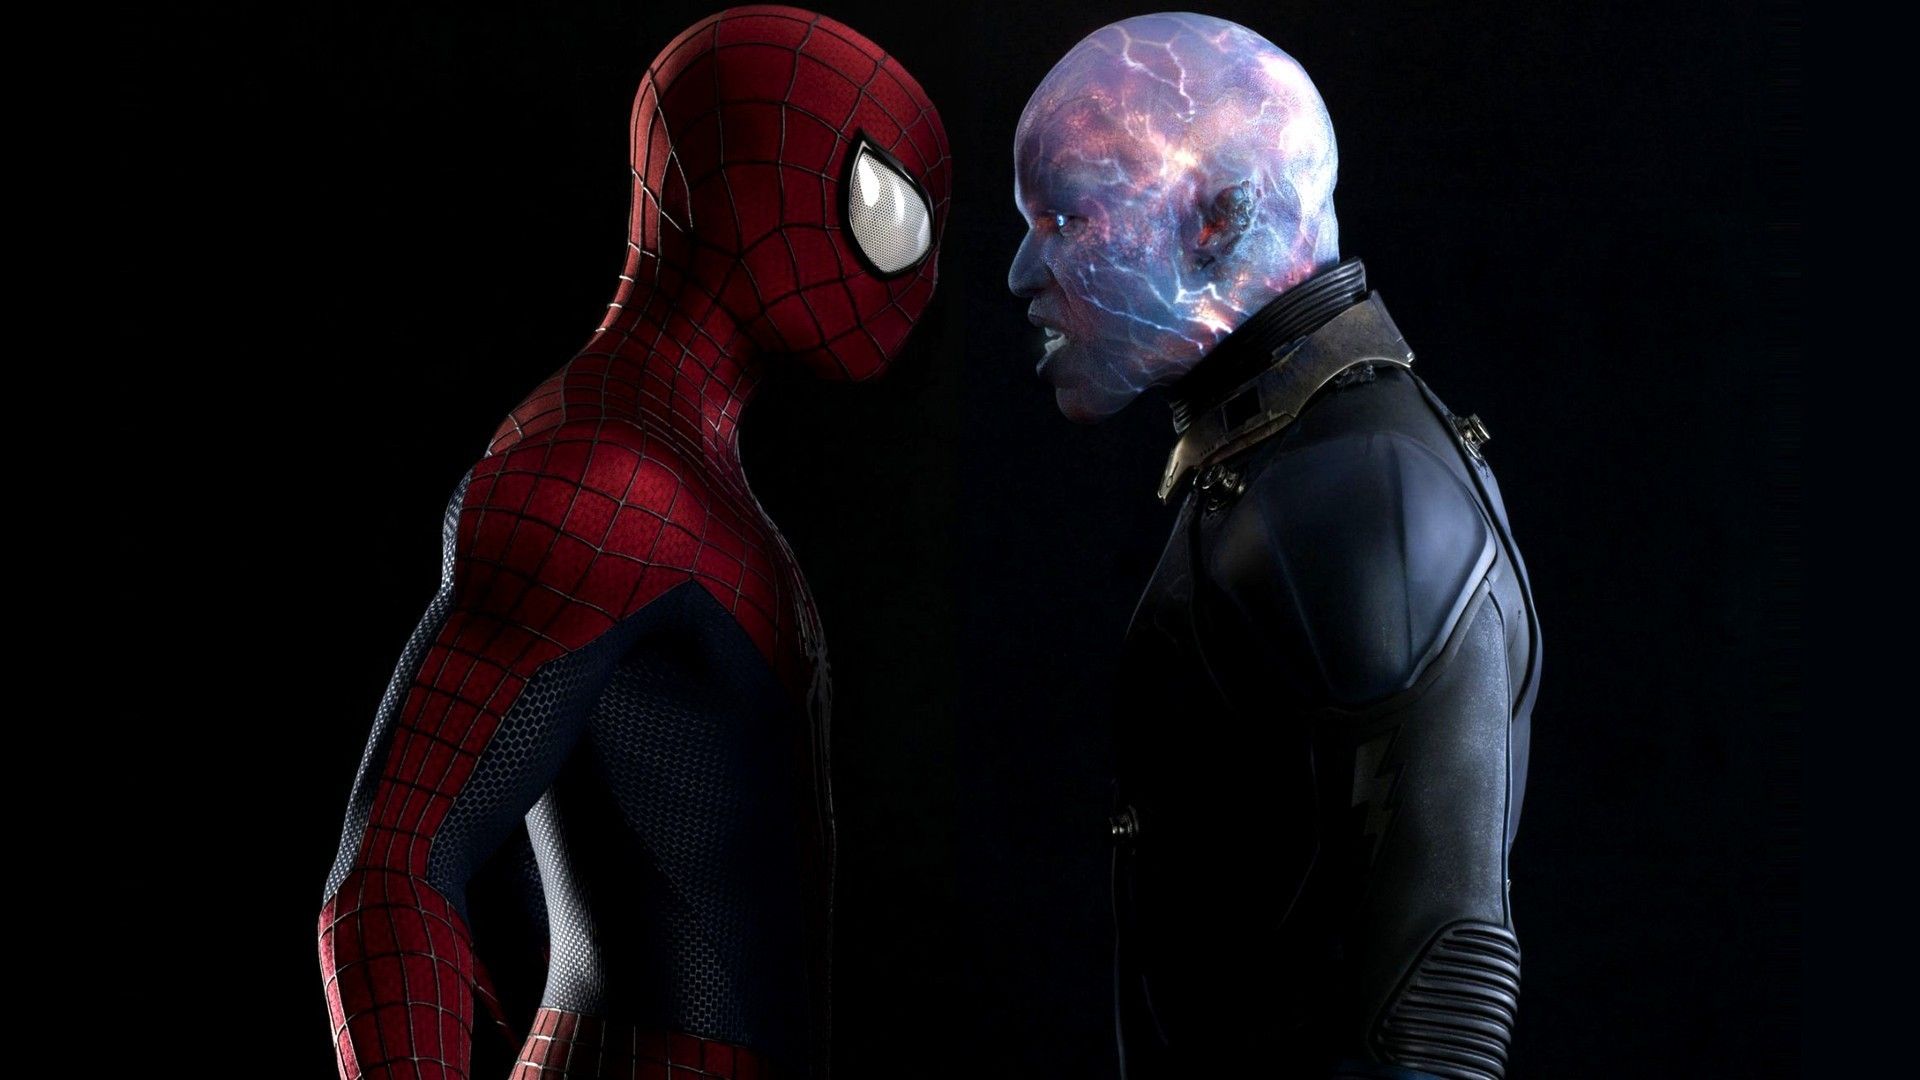 Free Download Spider Man Vs Electro The Amazing Spiderman 2 Wallpaper 16763 [1920x1080] For Your Desktop, Mobile & Tablet. Explore Spectacular Spider Man Wallpaper. Spectacular Spider Man Wallpaper, Spider Man